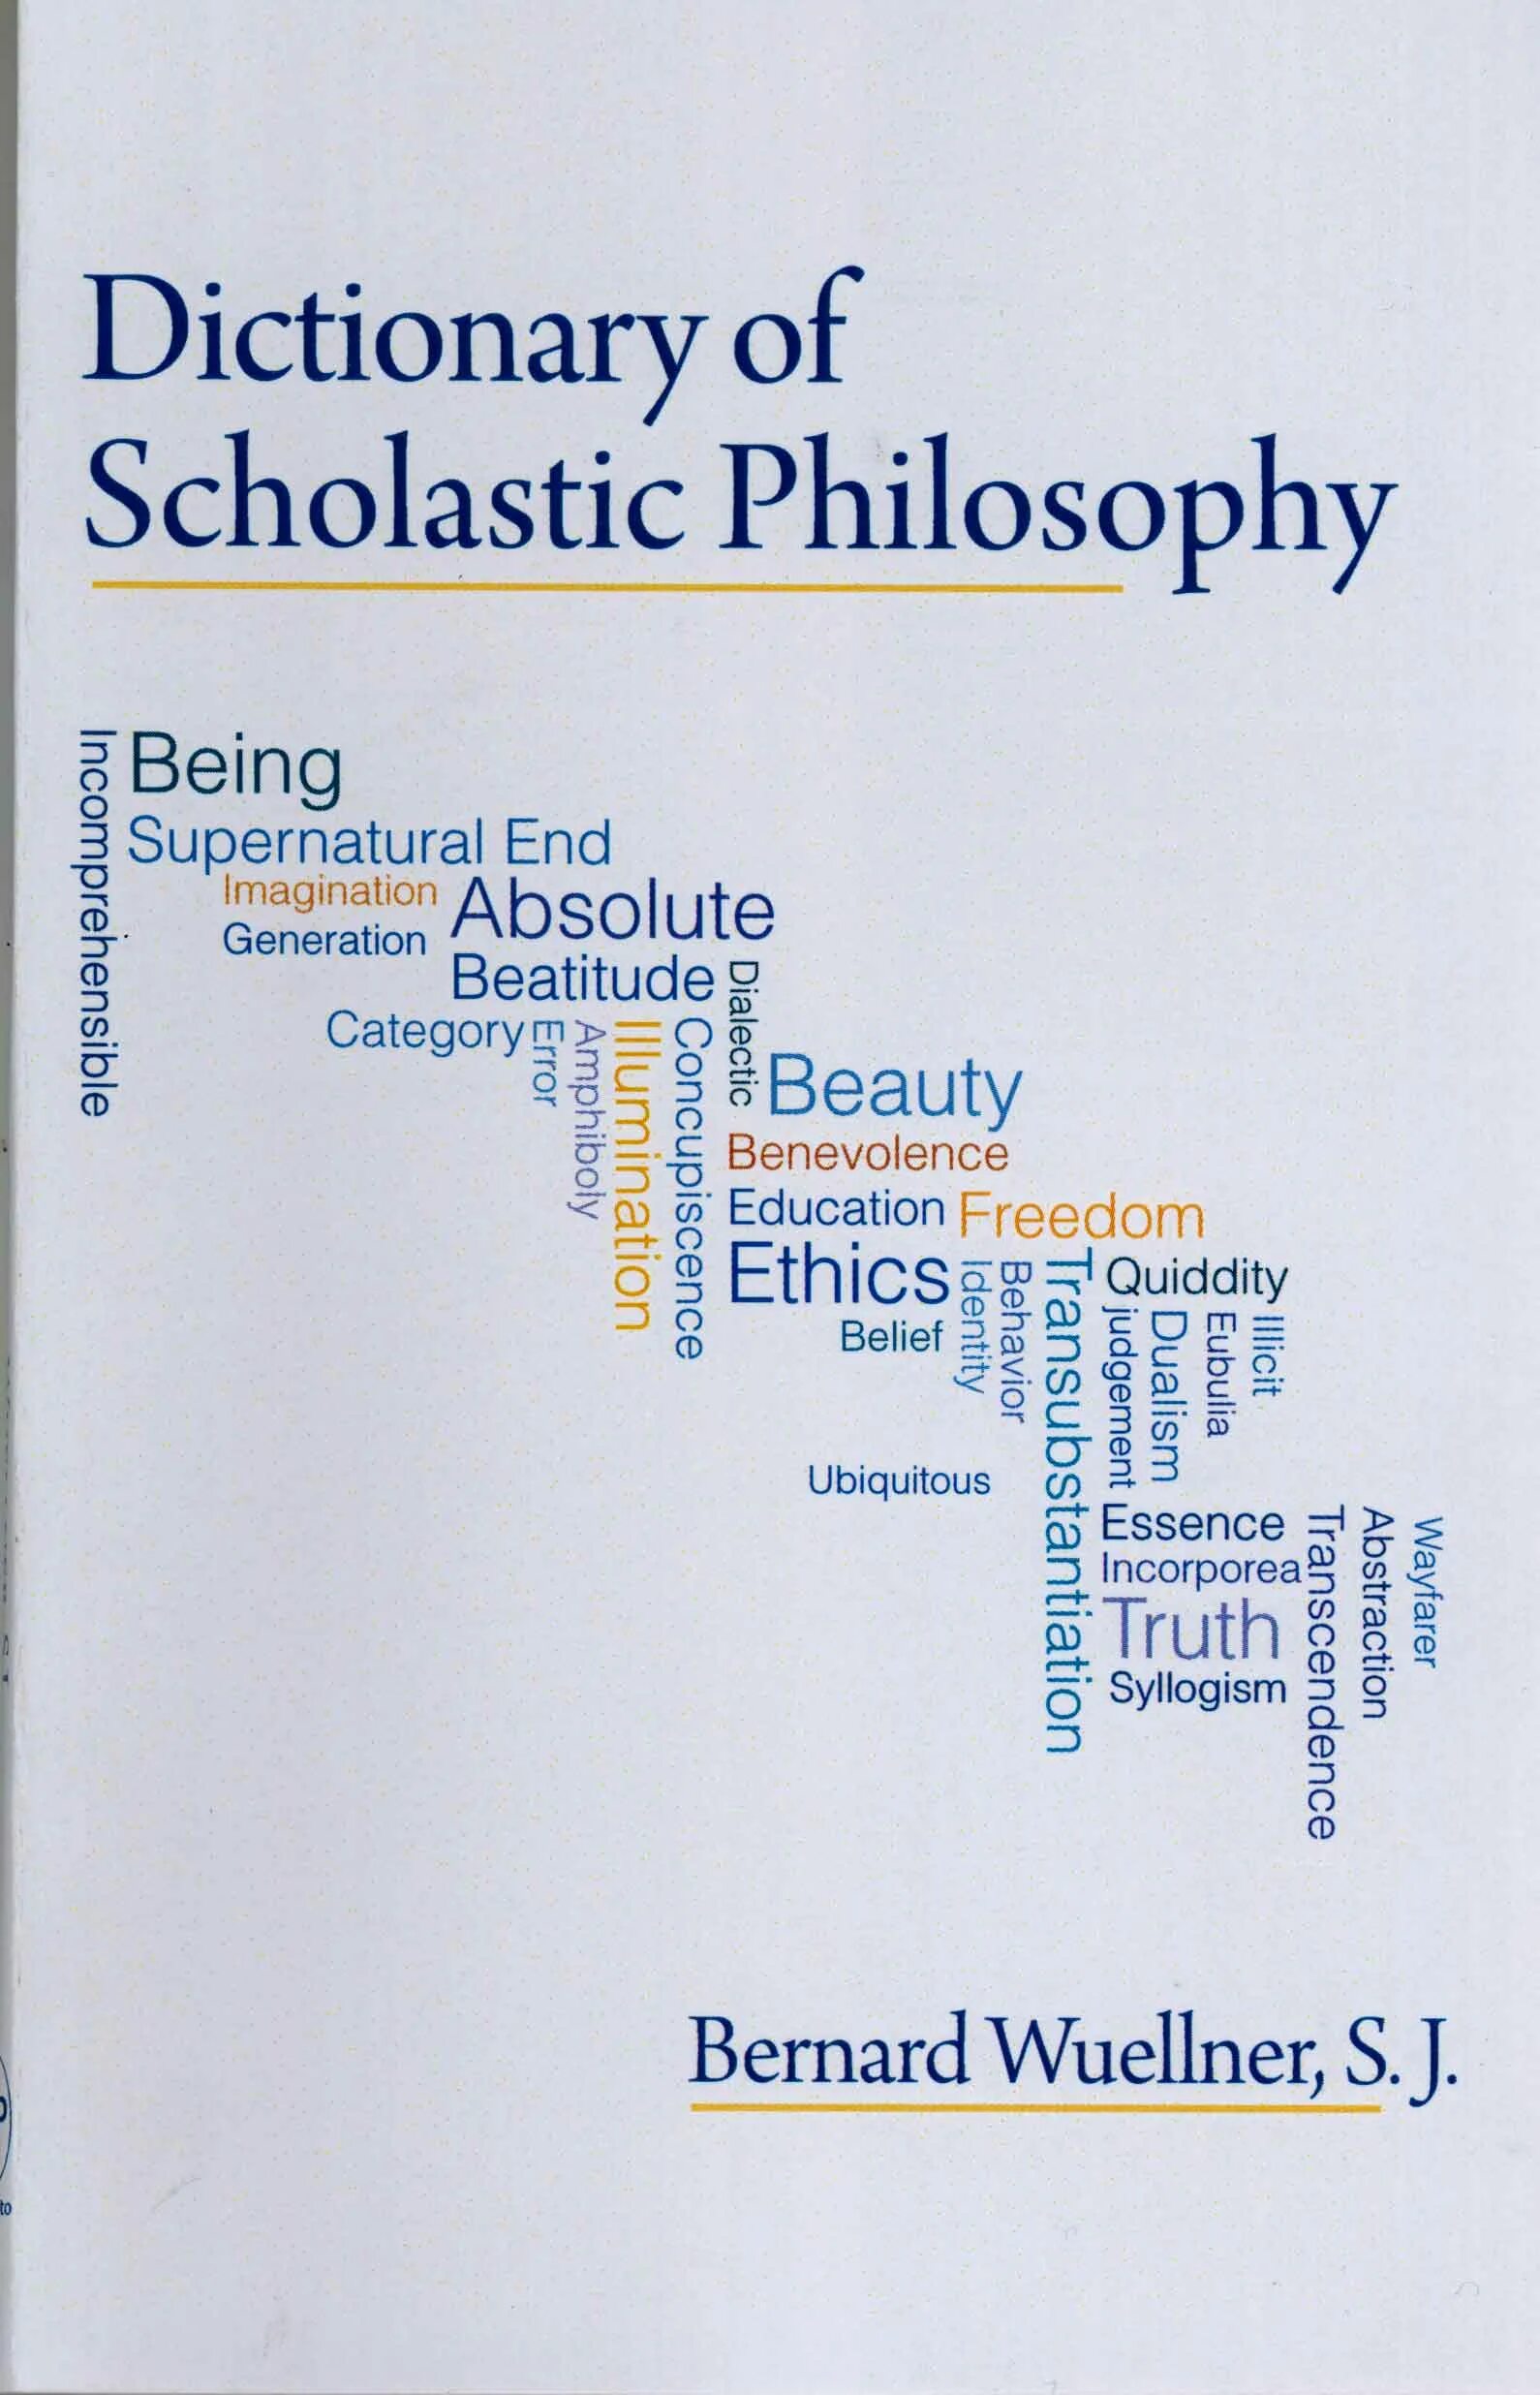 Philosophy School. Schools of Philosophy - personified - personality Index (PDX). The Philosophy of schooling. School of thought prizintatsiya.